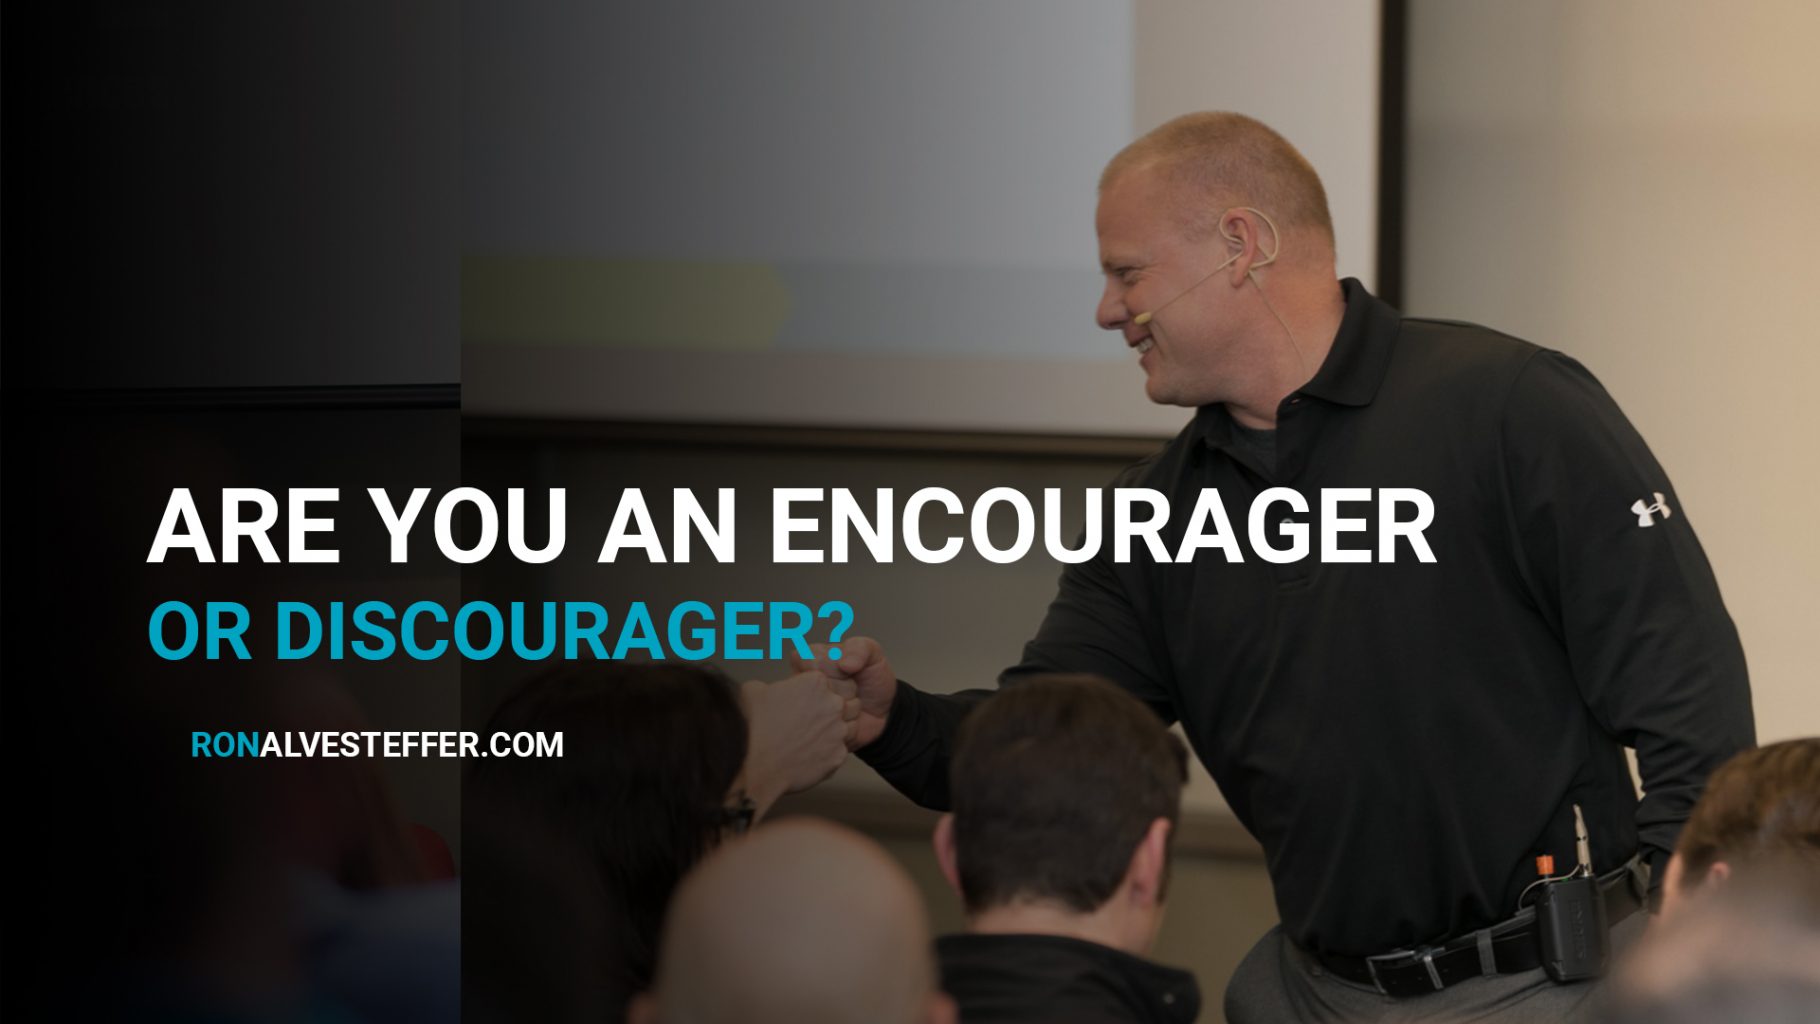 Are you an Encourager or a Discourager?